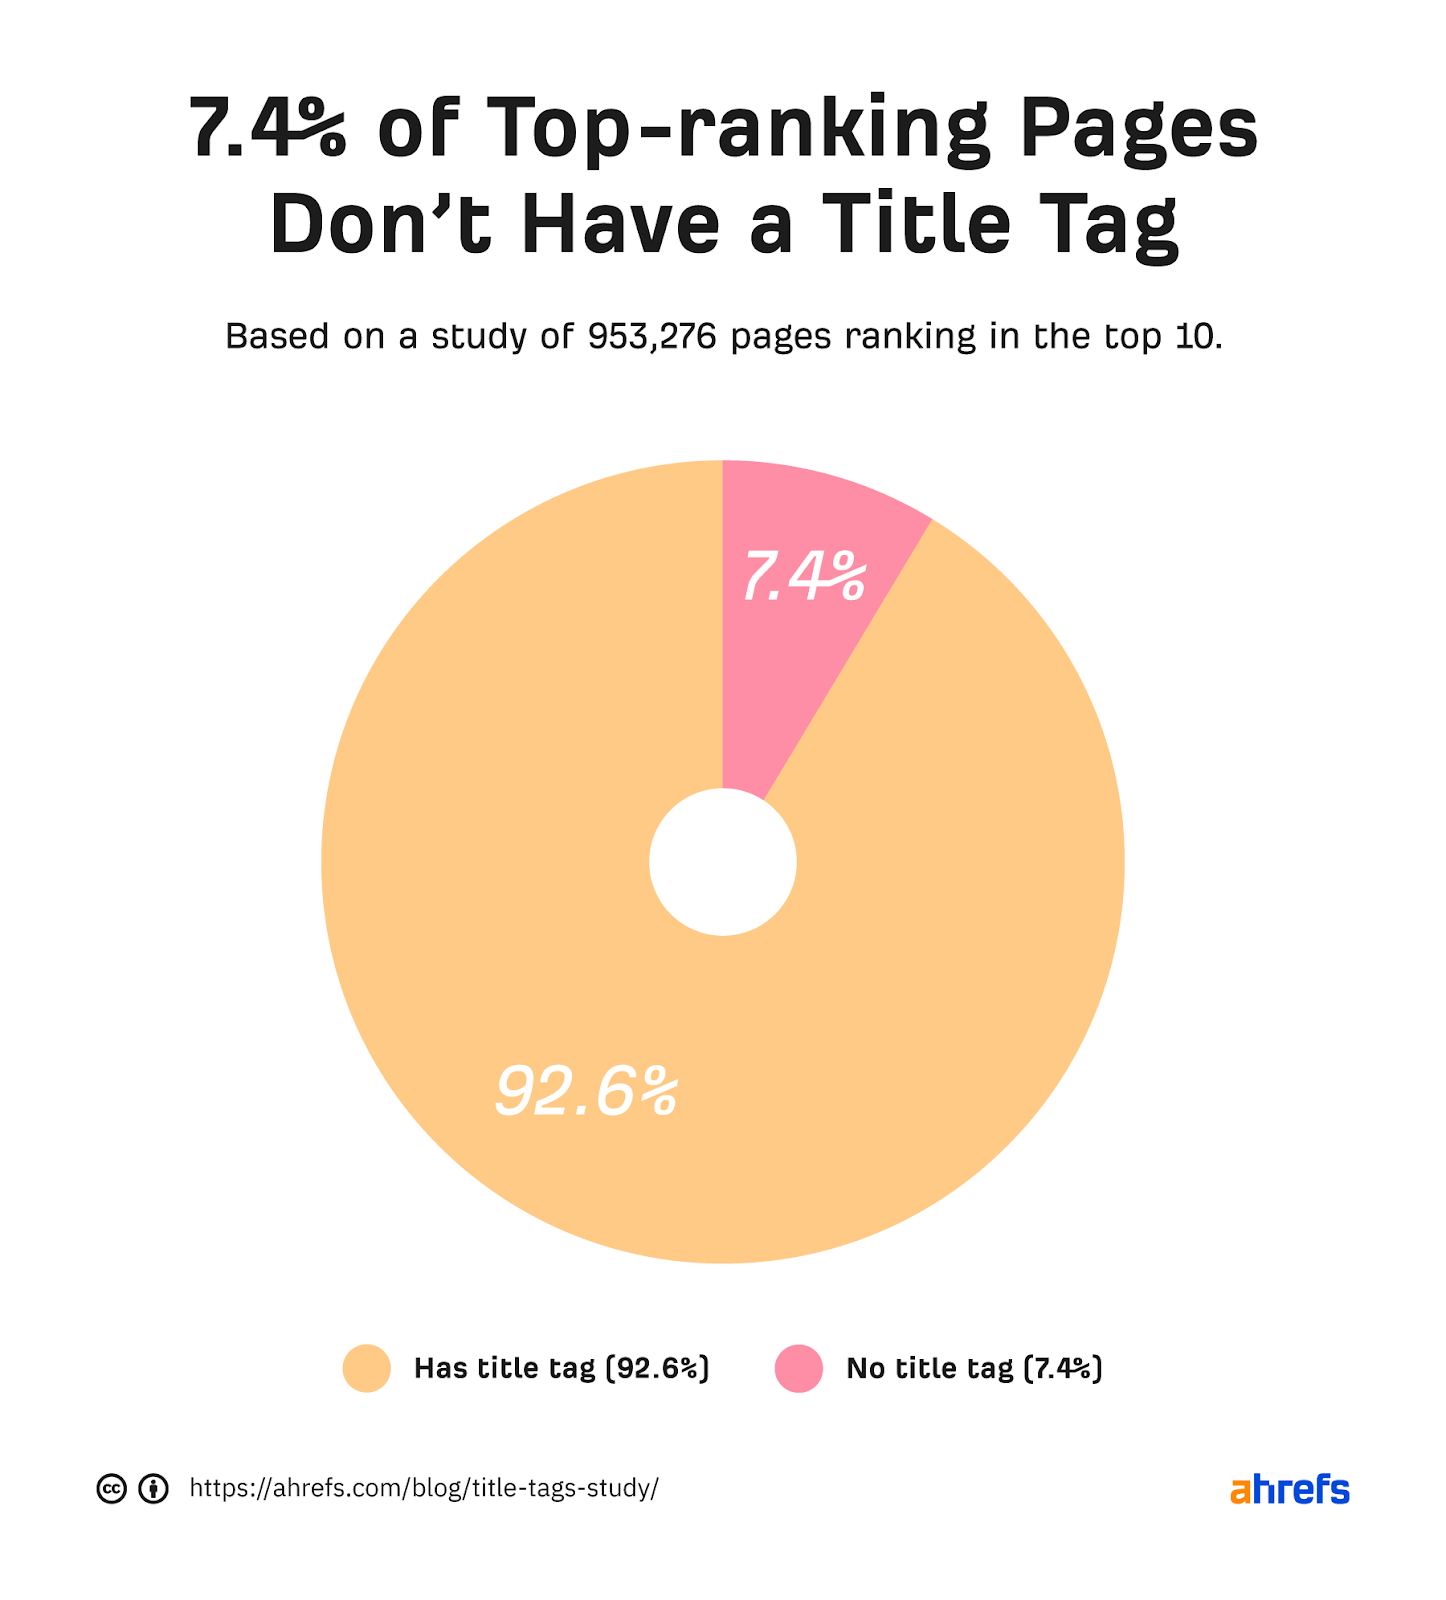 7.4{be494ddd22770f7453cc1807072194712b284fbd829f3f520d9a94732f0307ae} of top-ranking pages don't have a title tag